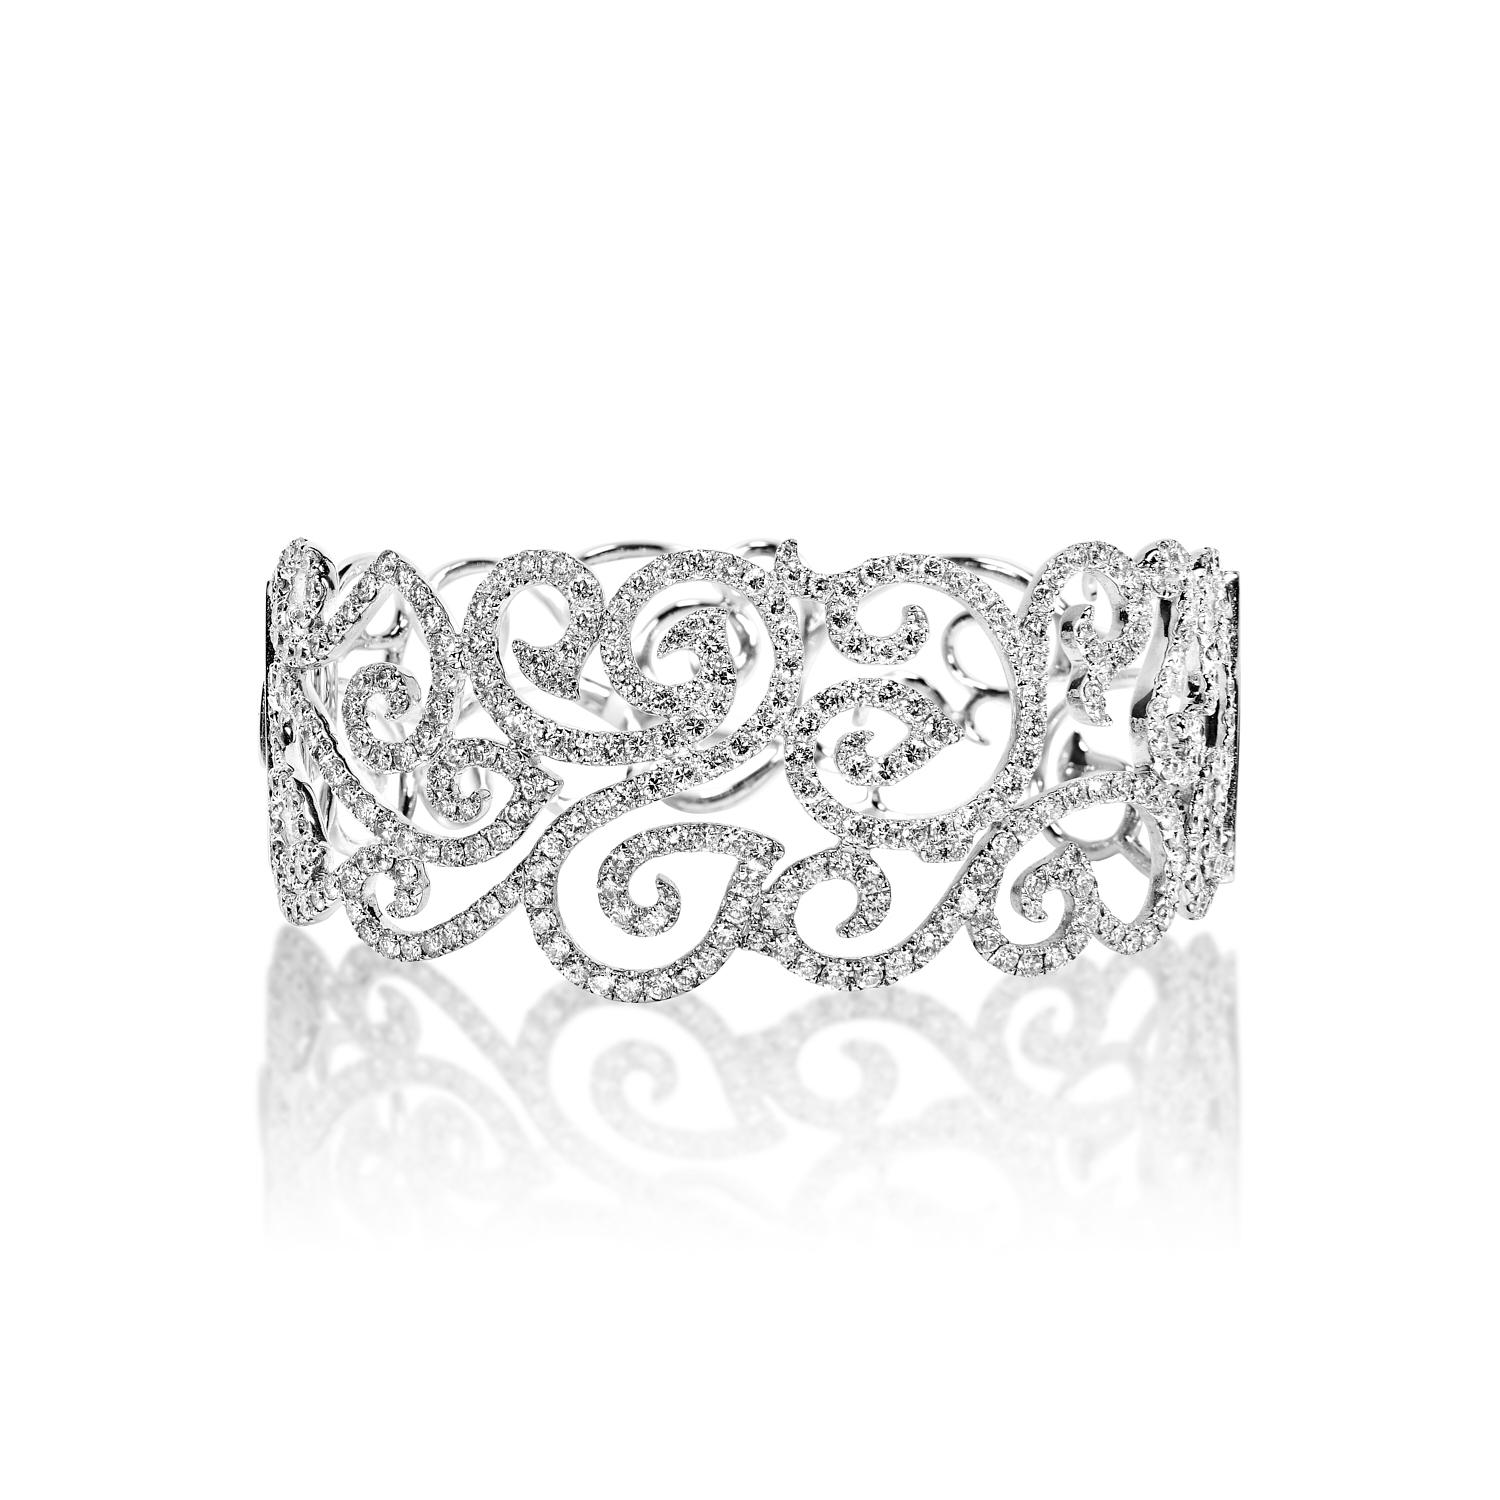 The PALMER 7.48 Carat Diamond Bangle Bracelet features Round DIAMONDS brilliants weighing a total of approximately 7.48 carats, set in 14K White Gold.

Style:
Diamonds
Diamond Size: 7.48 Carats
Diamond Shape: Round Brilliant Cut



Setting
Metal: 14